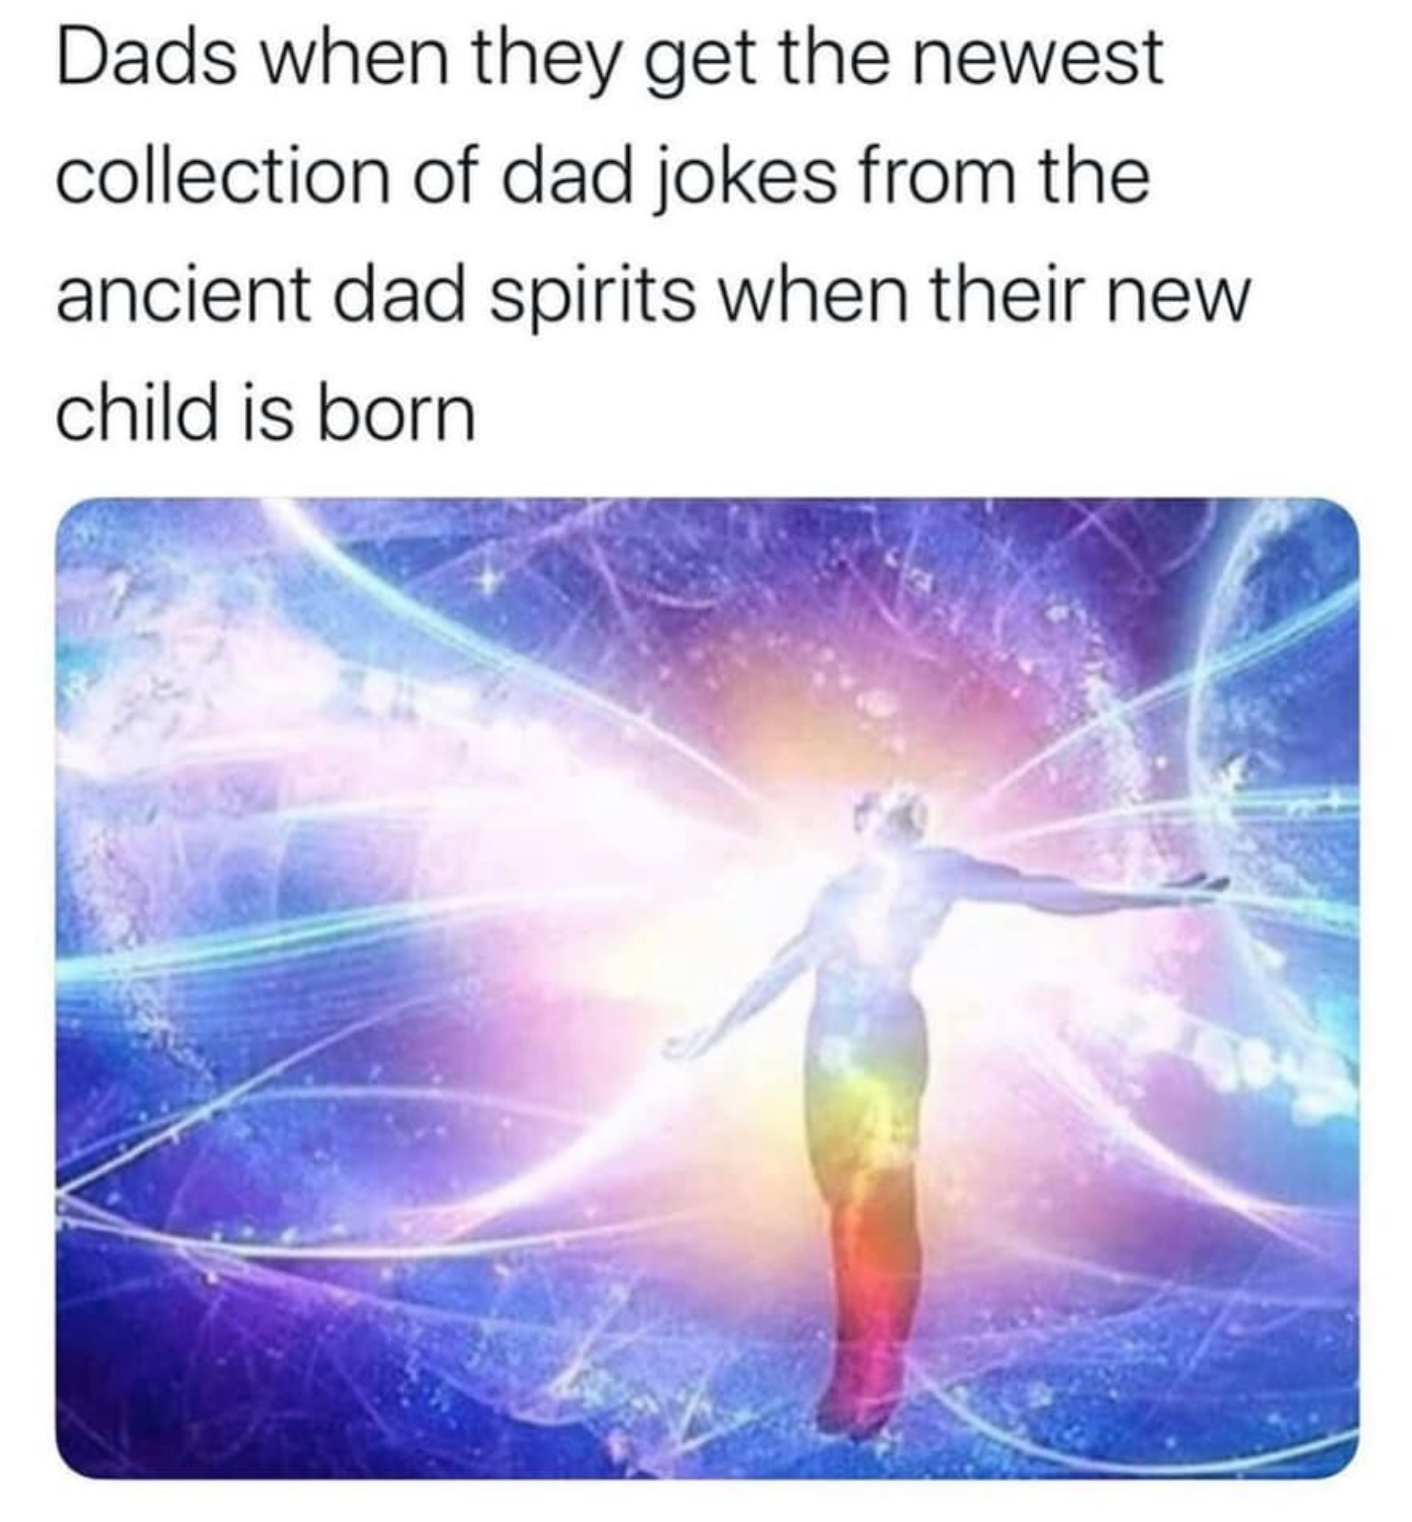 art space time continuum - Dads when they get the newest collection of dad jokes from the ancient dad spirits when their new child is born